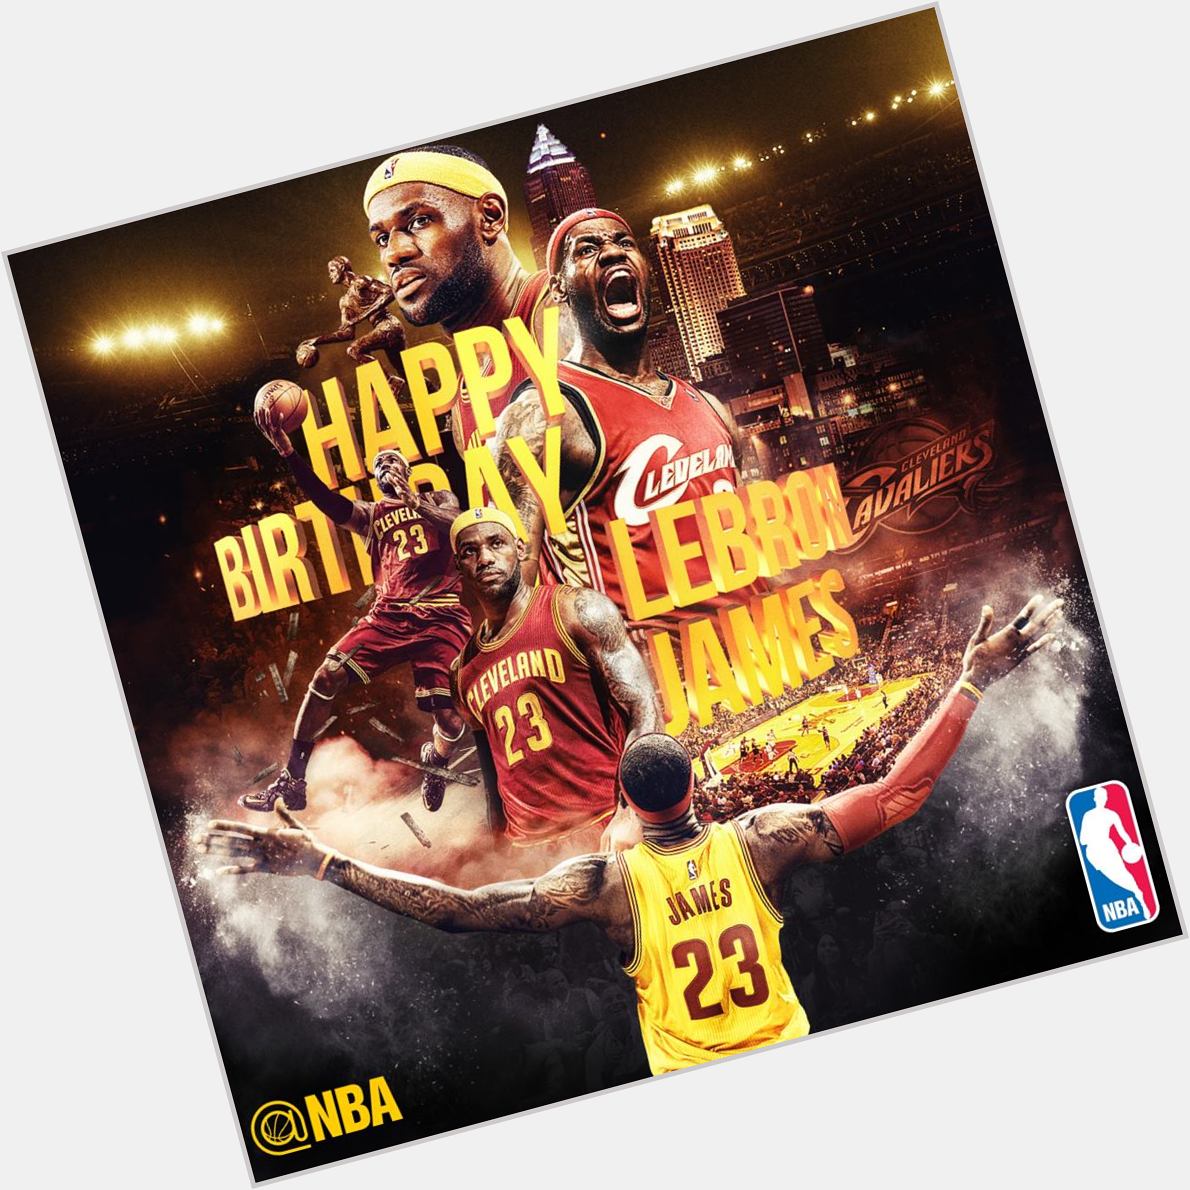 Haters...3....2....1. Soon to be the Greatest! 
Happy Birthday IDOL! Lebron James 23 